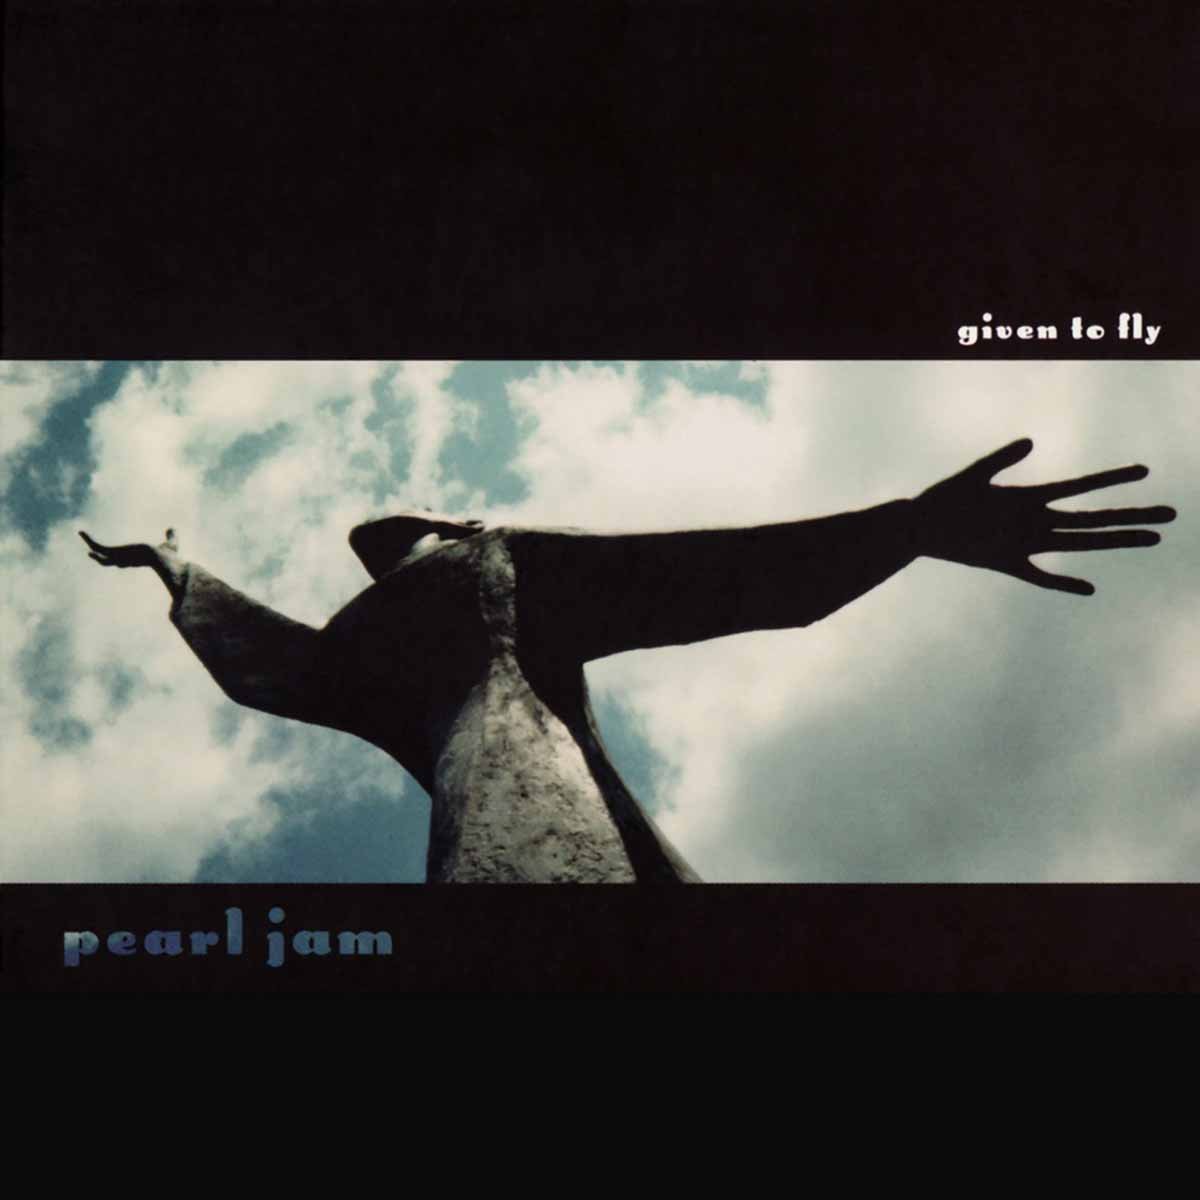 Pearl Jam "given To Fly" B/w "pilate" & "leatherman"